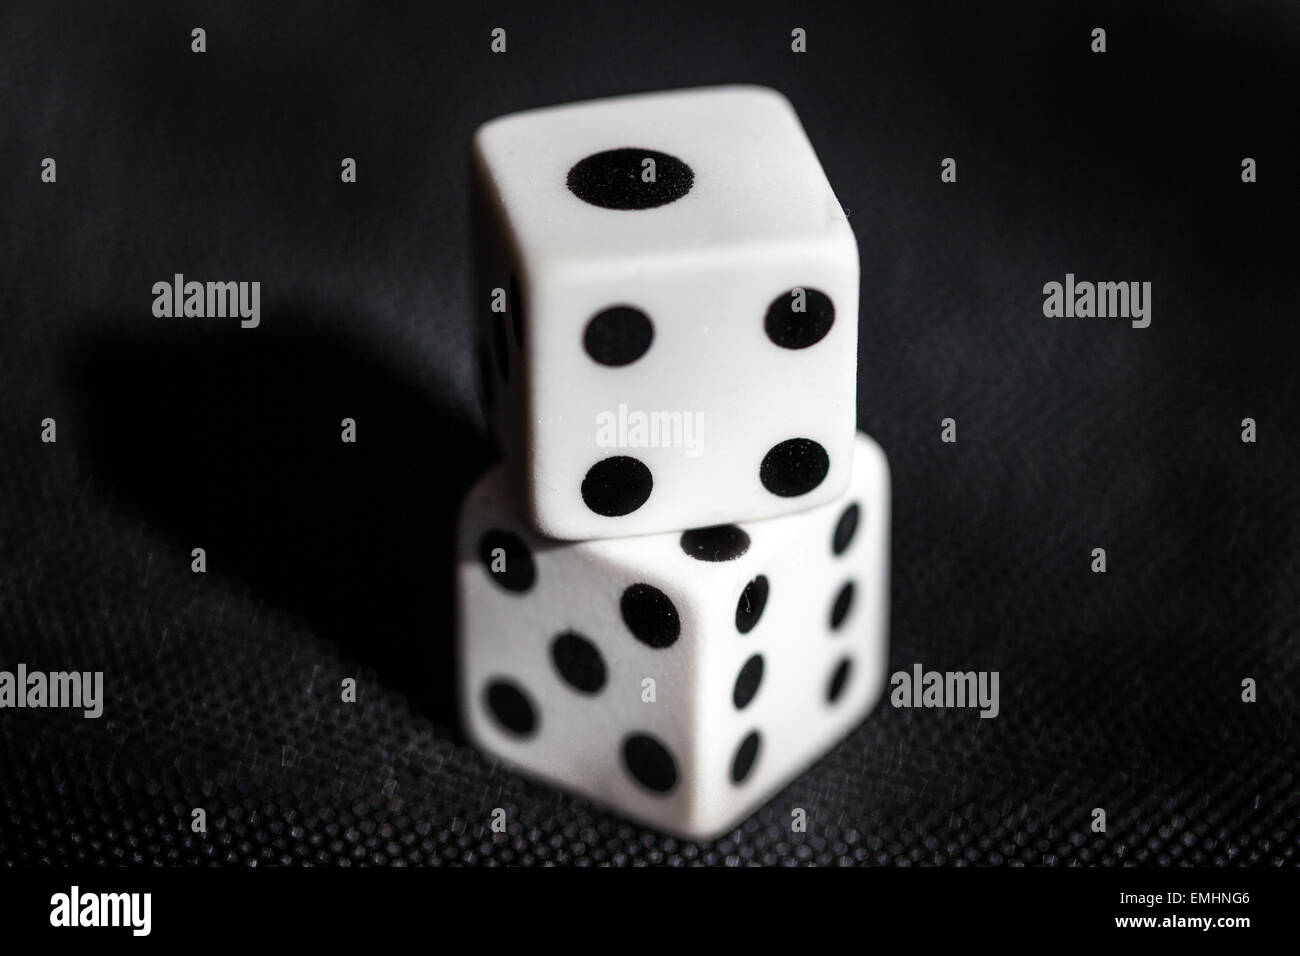 High angle view and close up of two rubber dice Stock Photo